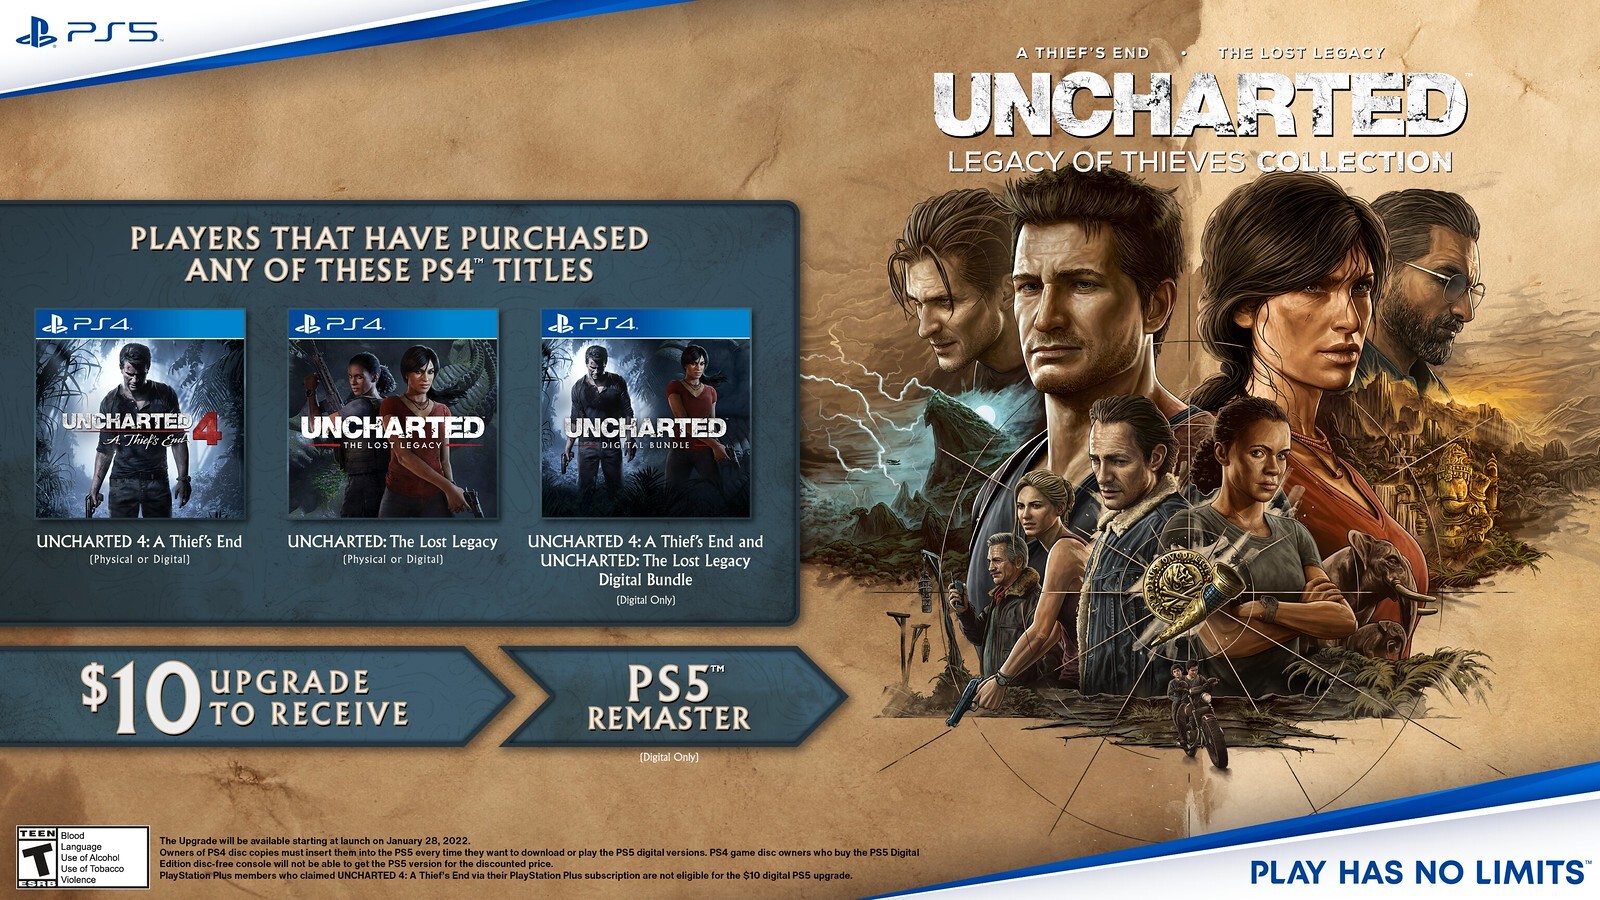 Pin by Jacqueline on Uncharted (games)  Uncharted game, Uncharted,  Uncharted series